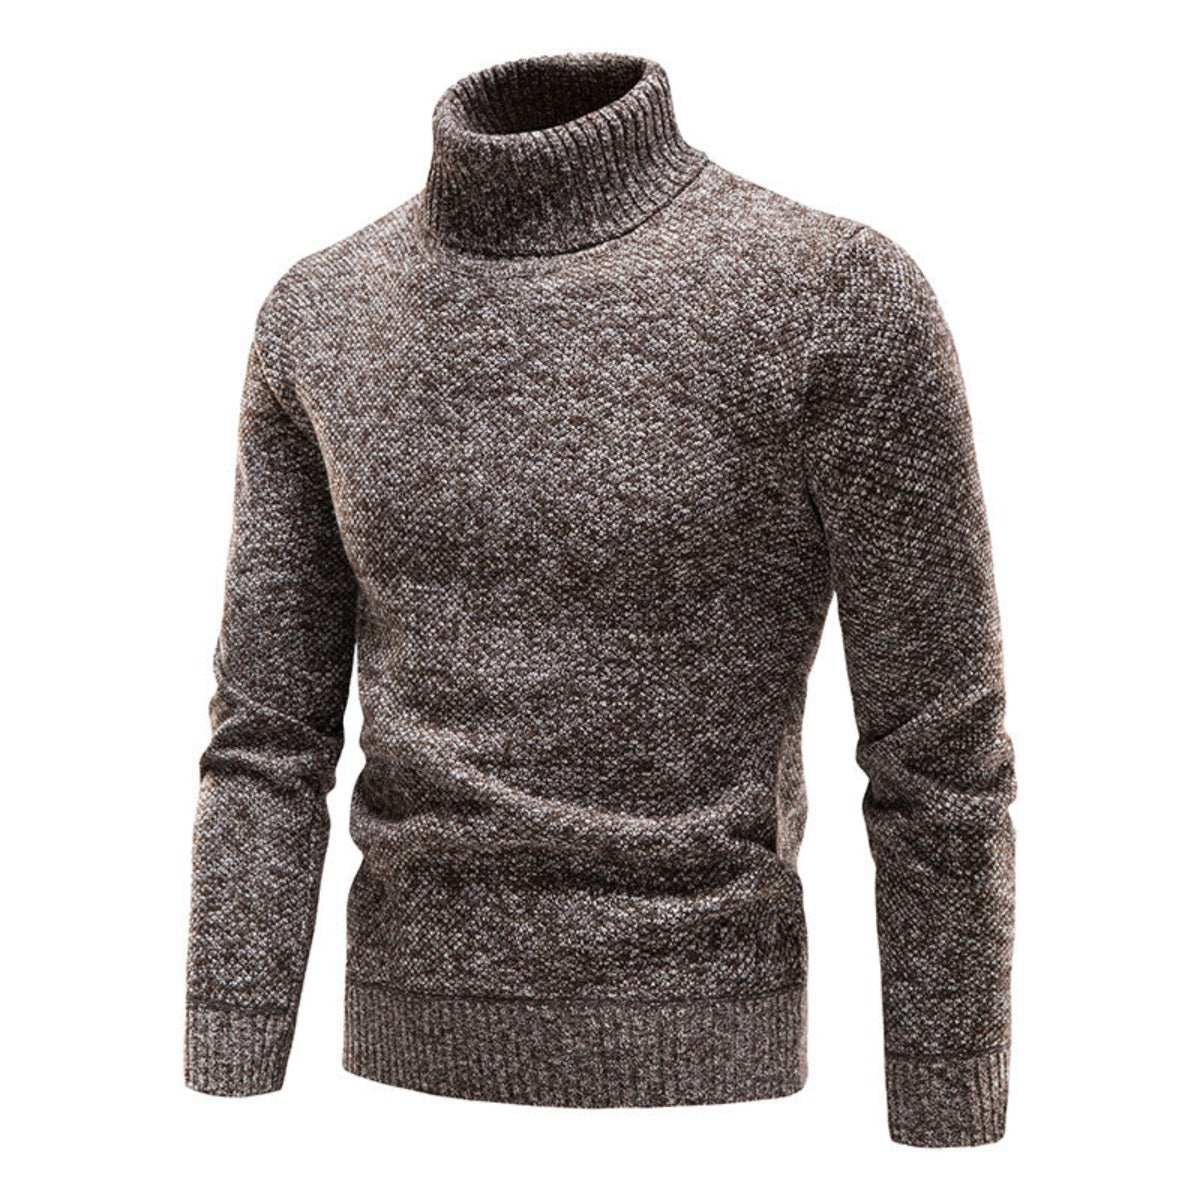 Double Duty Warmth: Undershirt Turtleneck Sweater for Layering Comfort LA ROSE BEAUTY